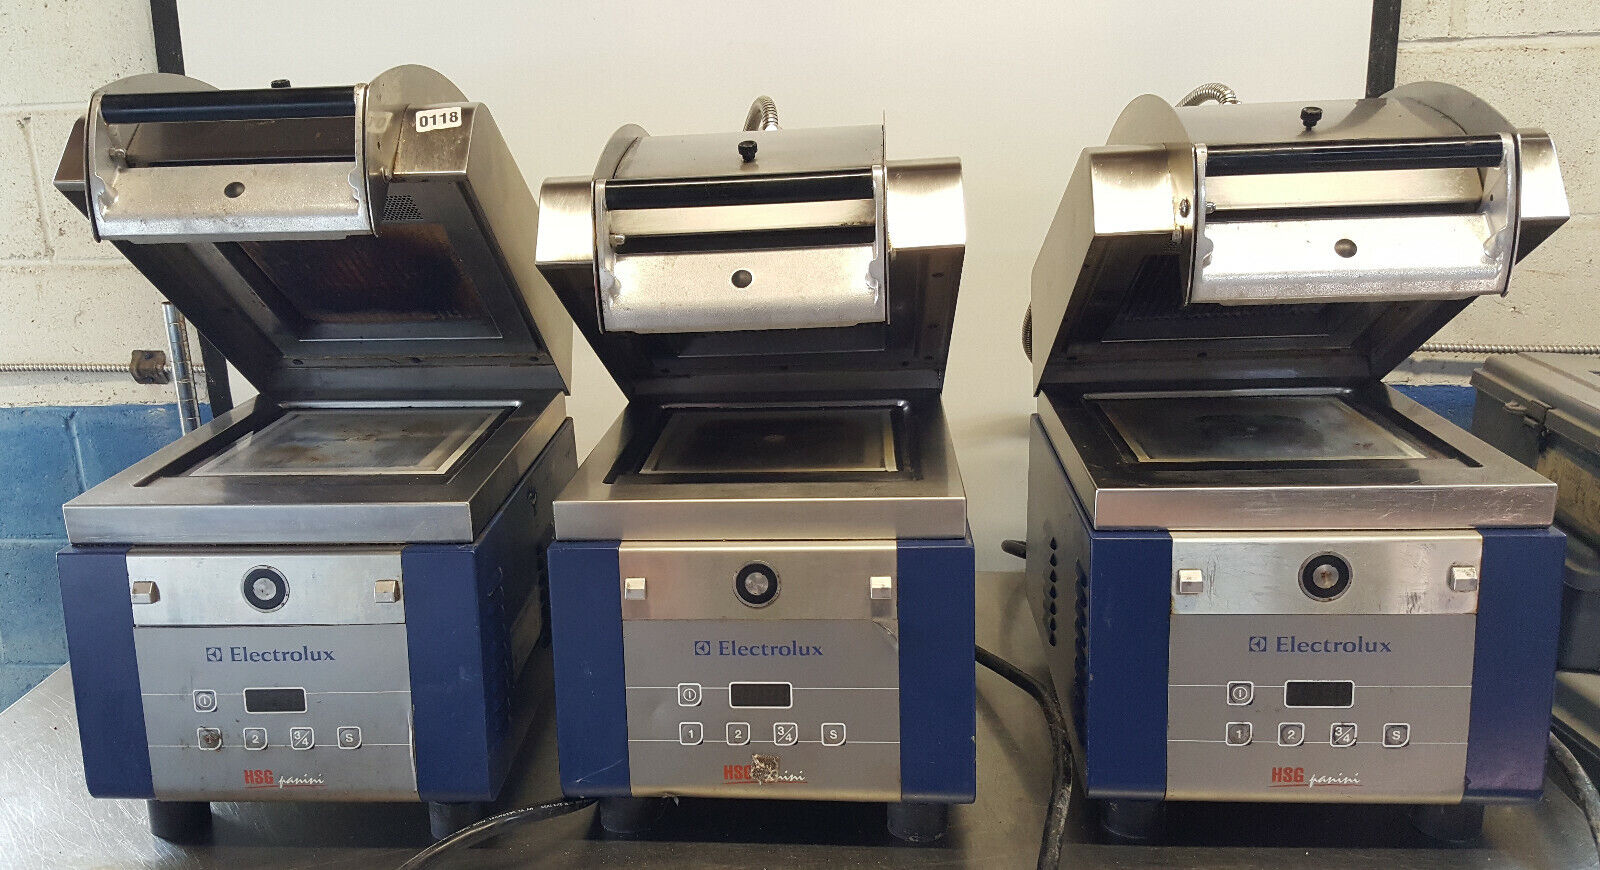 SET of 3 (2016) Electrolux HSPPAN High Speed Microwave Panini Presses (TESTED) Electrolux Professional High Speed Panini